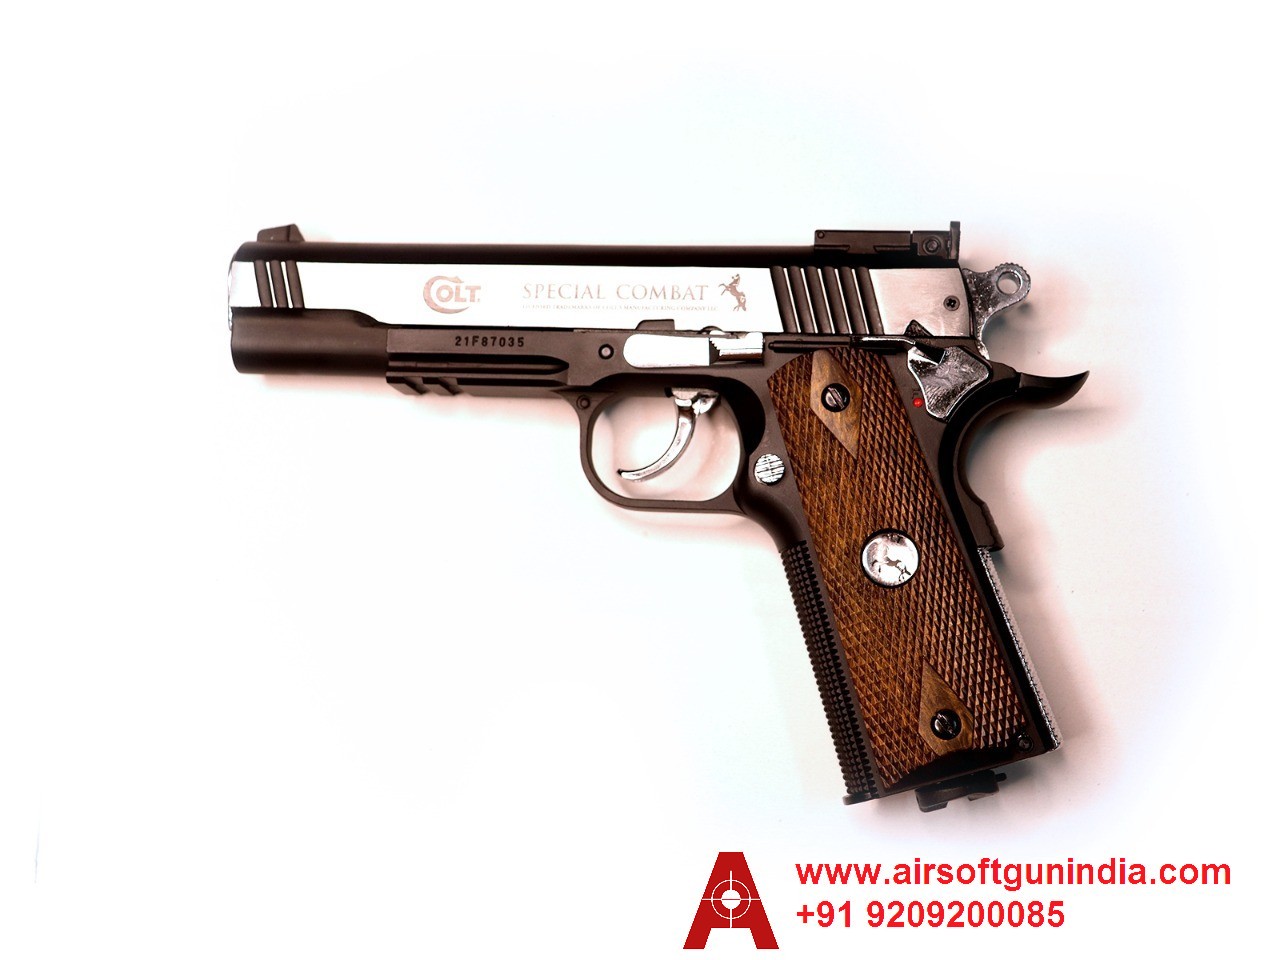 Colt 1911 Special Combat Classic 4.5mm, .177cal Co2 BB Air Pistol By Airsoft Gun India